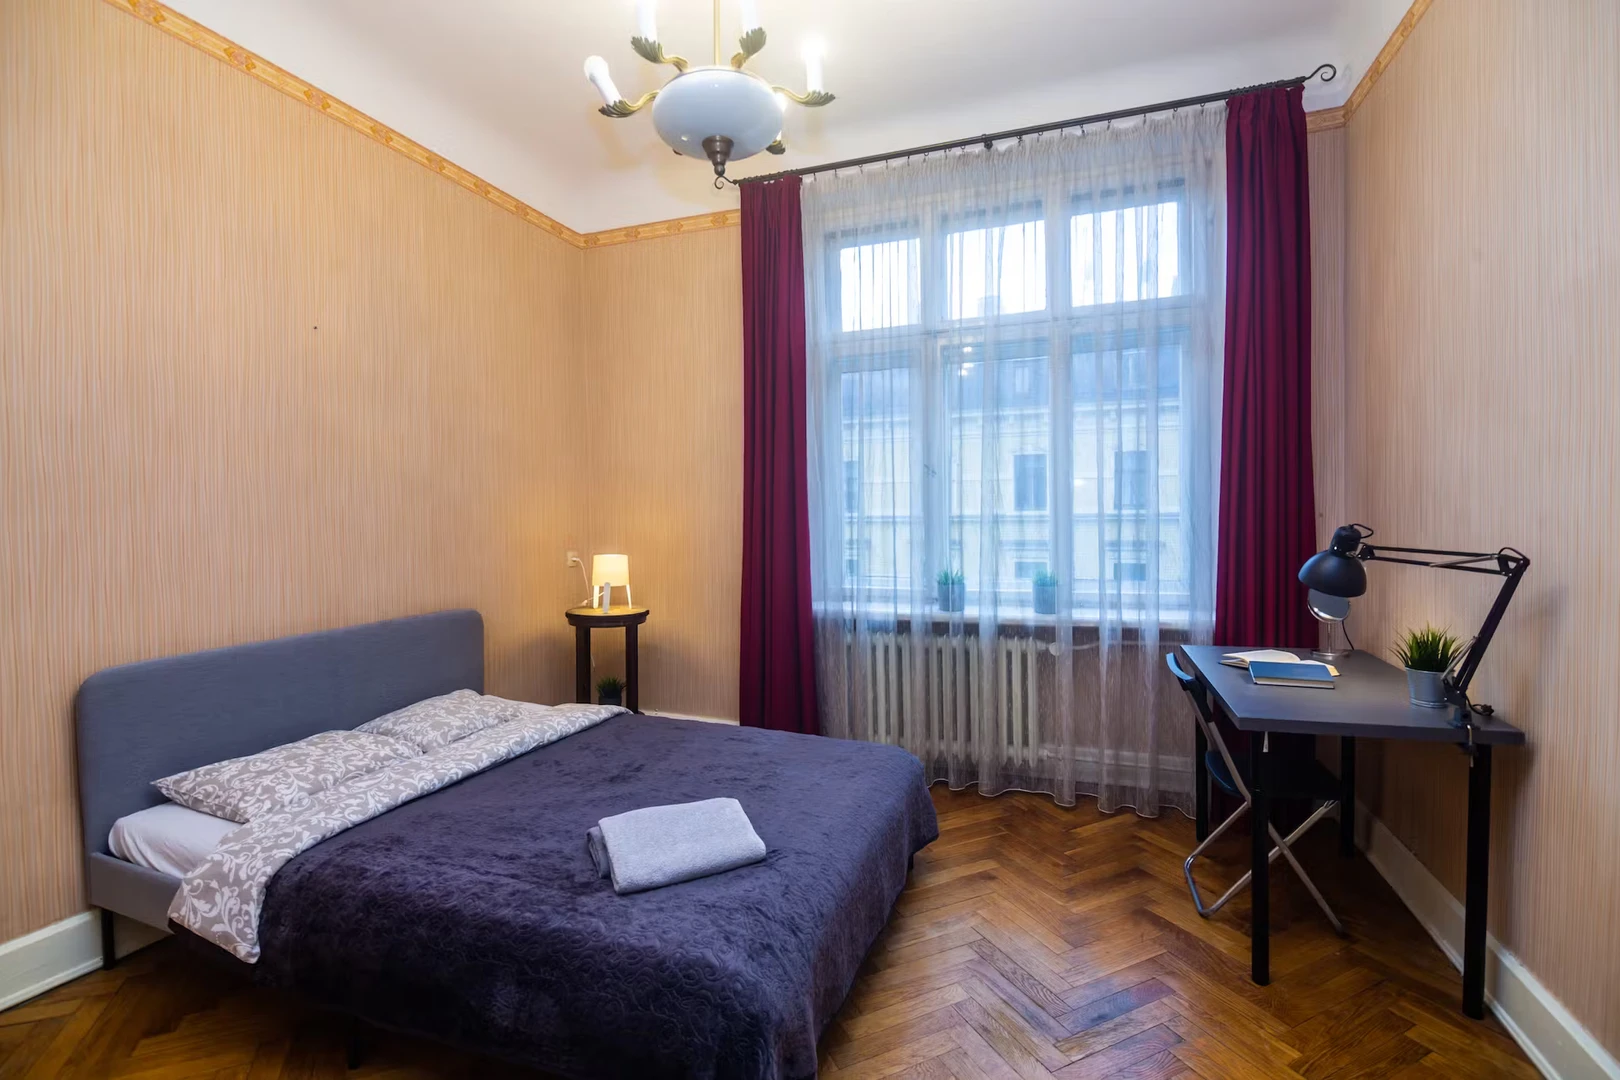 Renting rooms by the month in riga